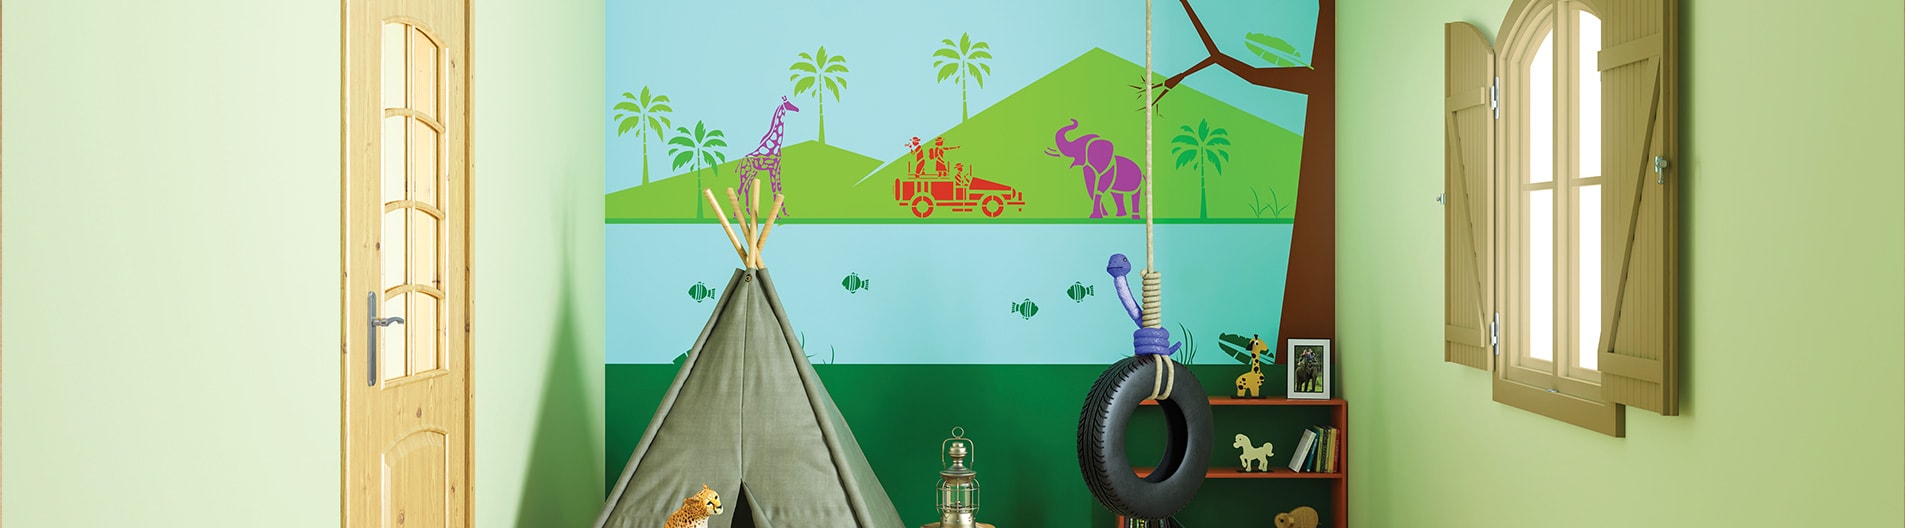 Glow Themes For Kids Room Wall Painting Asian Paints